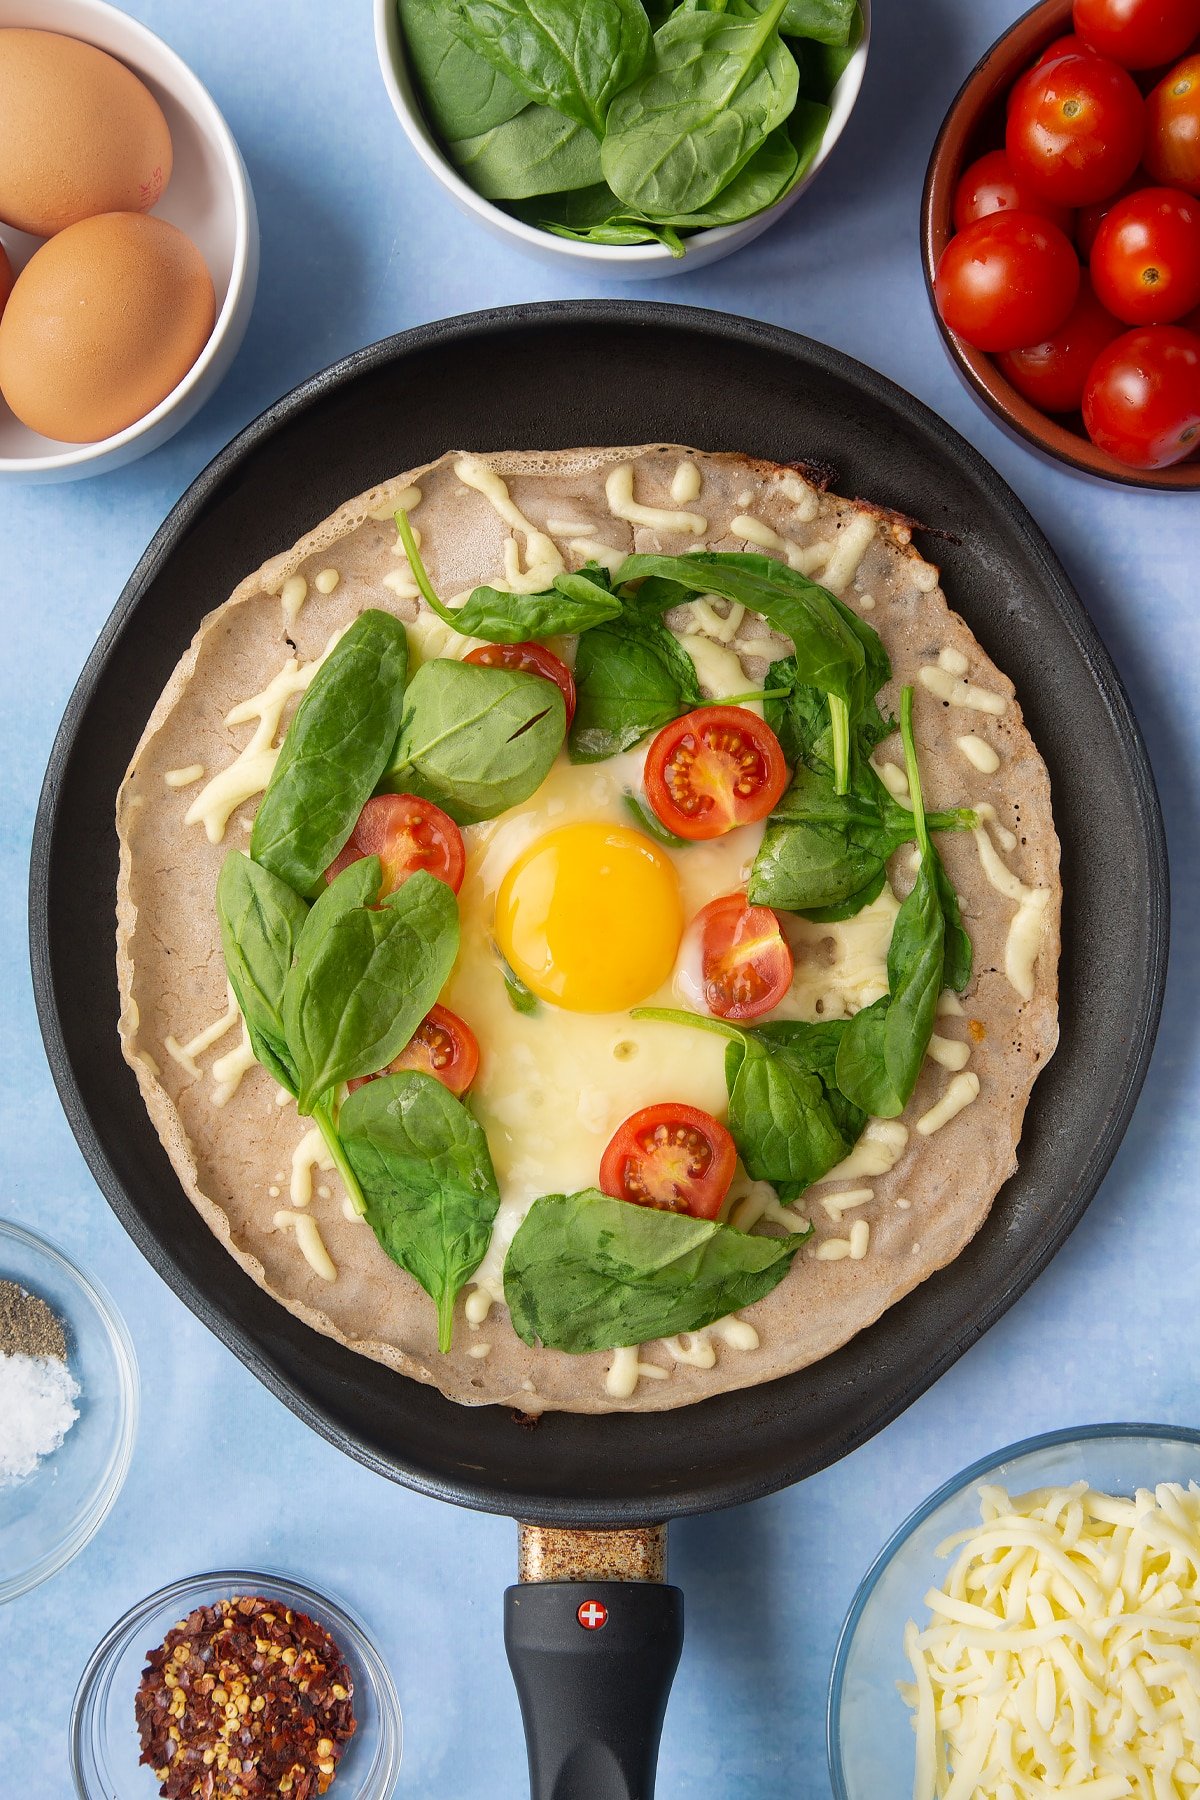 Buckwheat crepe topped with grated cheese, cherry tomatoes and spinach in a crepe pan. An egg is cooked in the centre. Ingredients to make buckwheat galettes surround the pan.